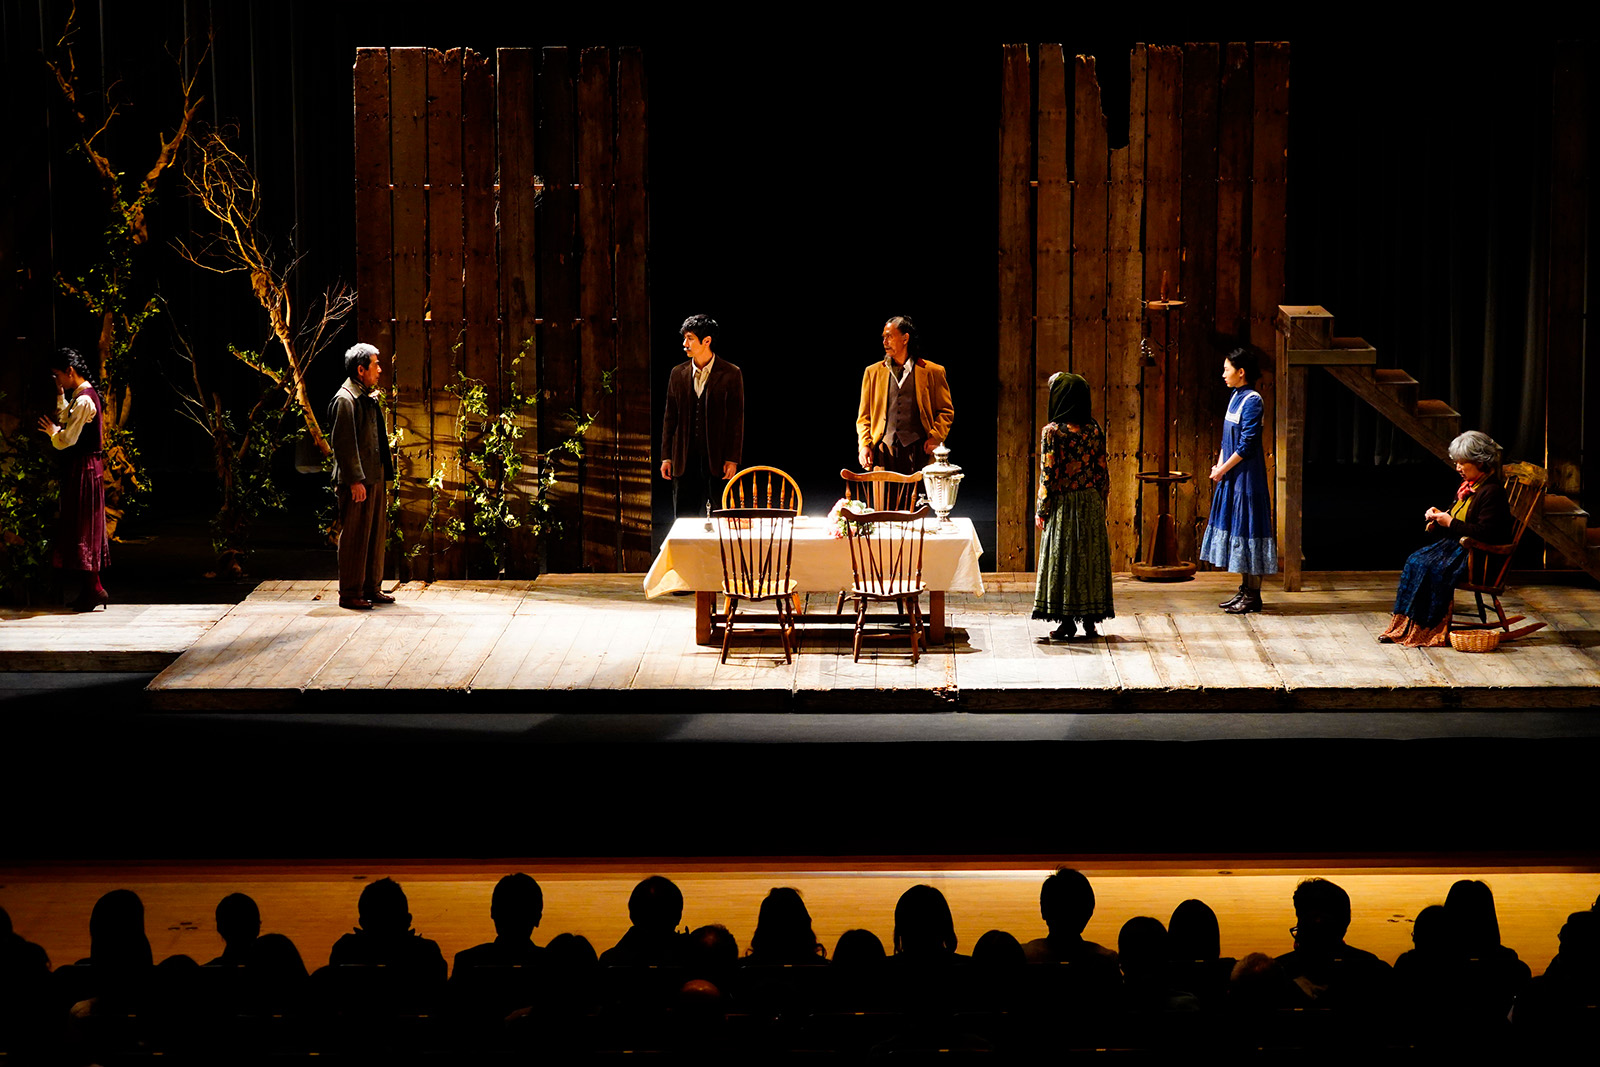 The staging of Uncle Vanya acts as a plot device in Drive My Car. Image © Bitters End